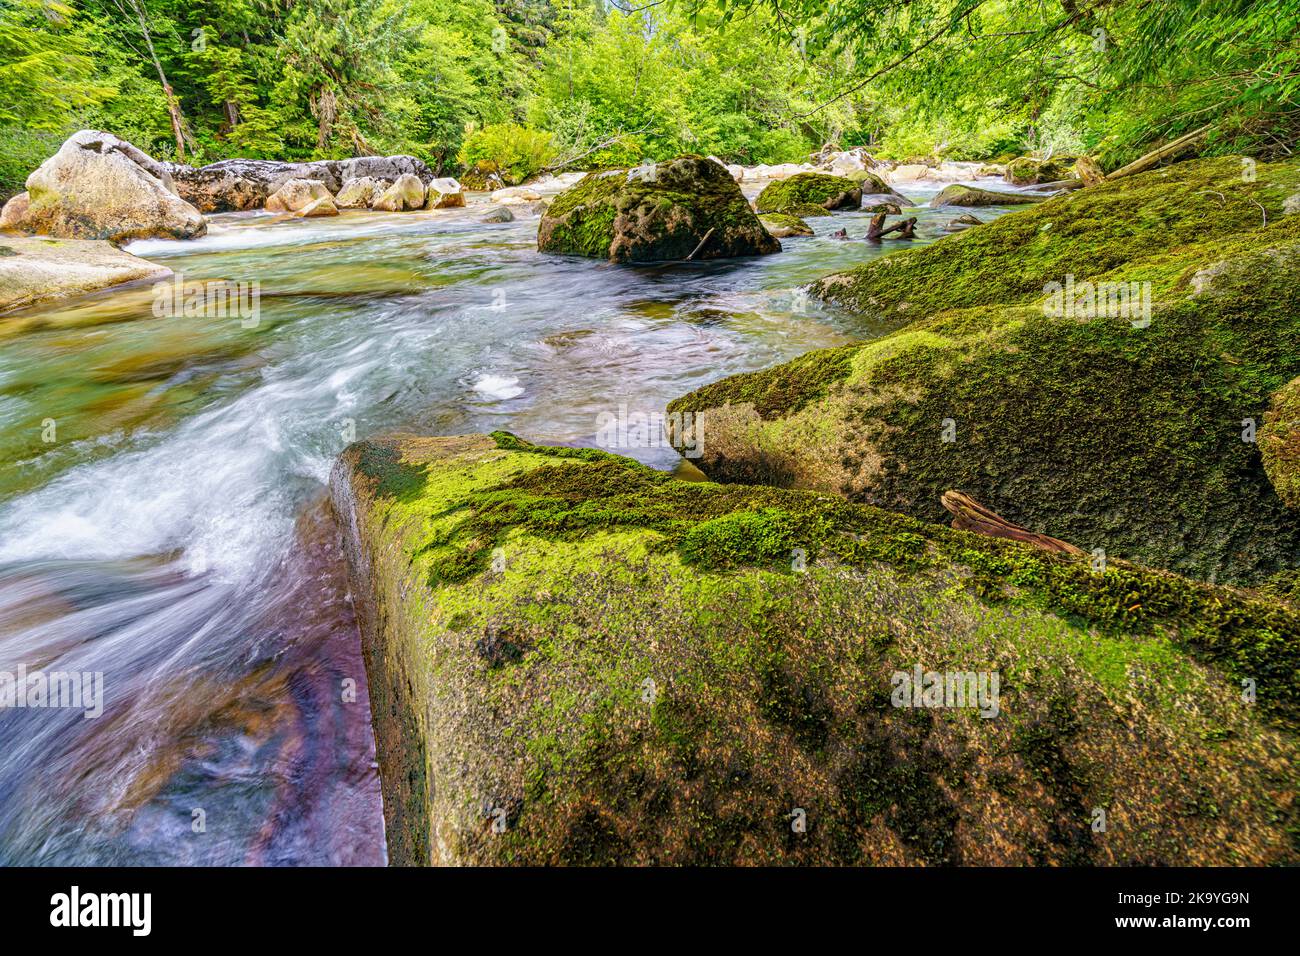 Beautiful clear river flowing through the Great Bear Rainforest, Kingcome Inlet, First Nations Territory, British Columbia, Canada. Stock Photo